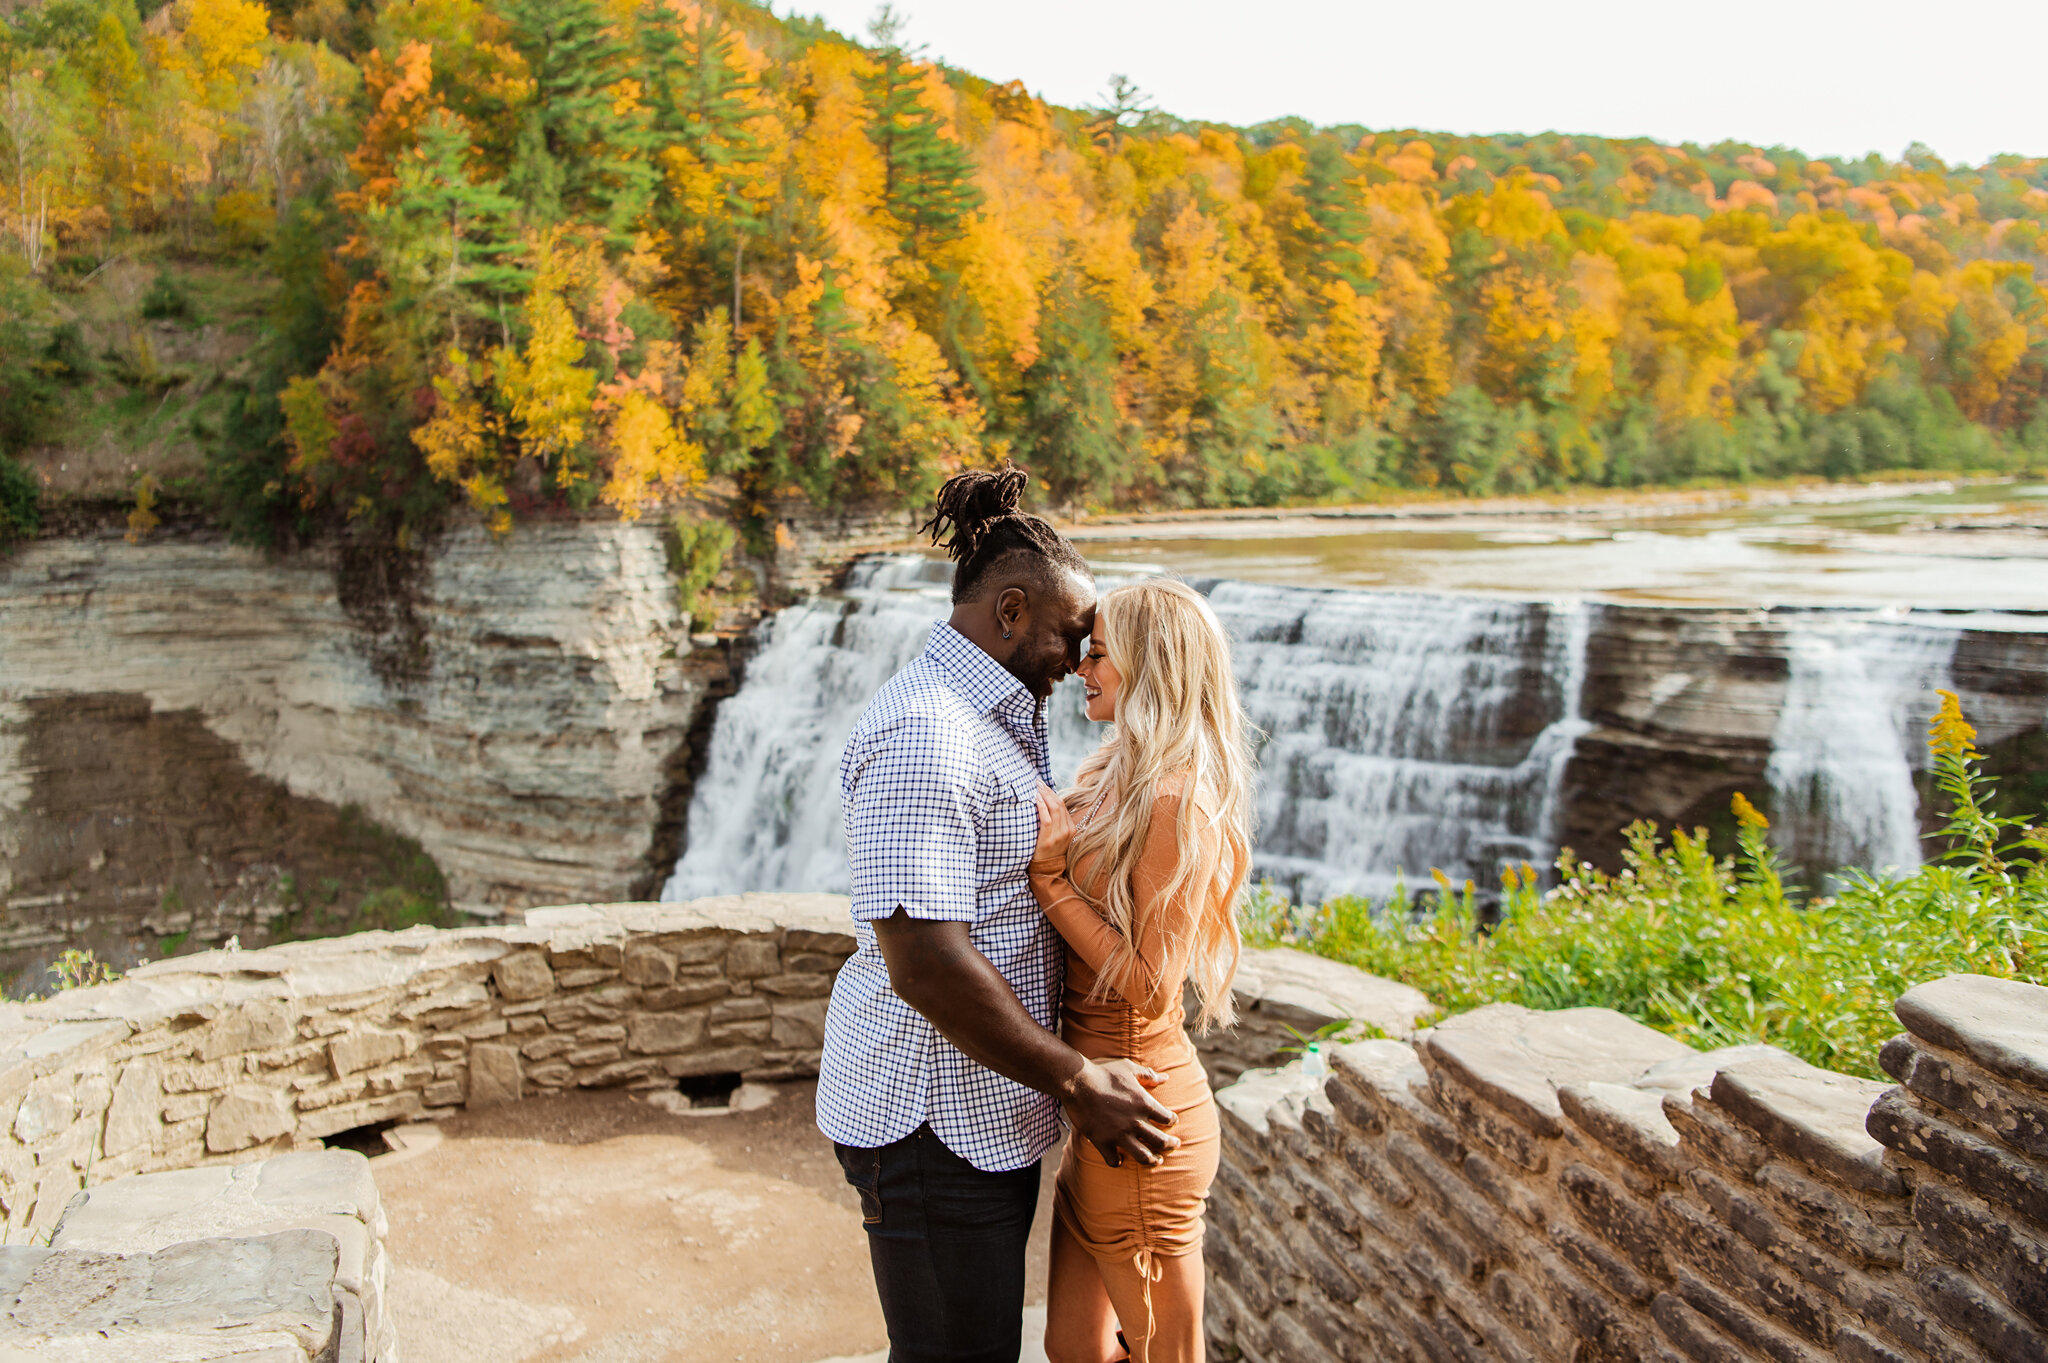 Letchworth_State_Park_Rochester_Couples_Session_JILL_STUDIO_Rochester_NY_Photographer_9109.jpg